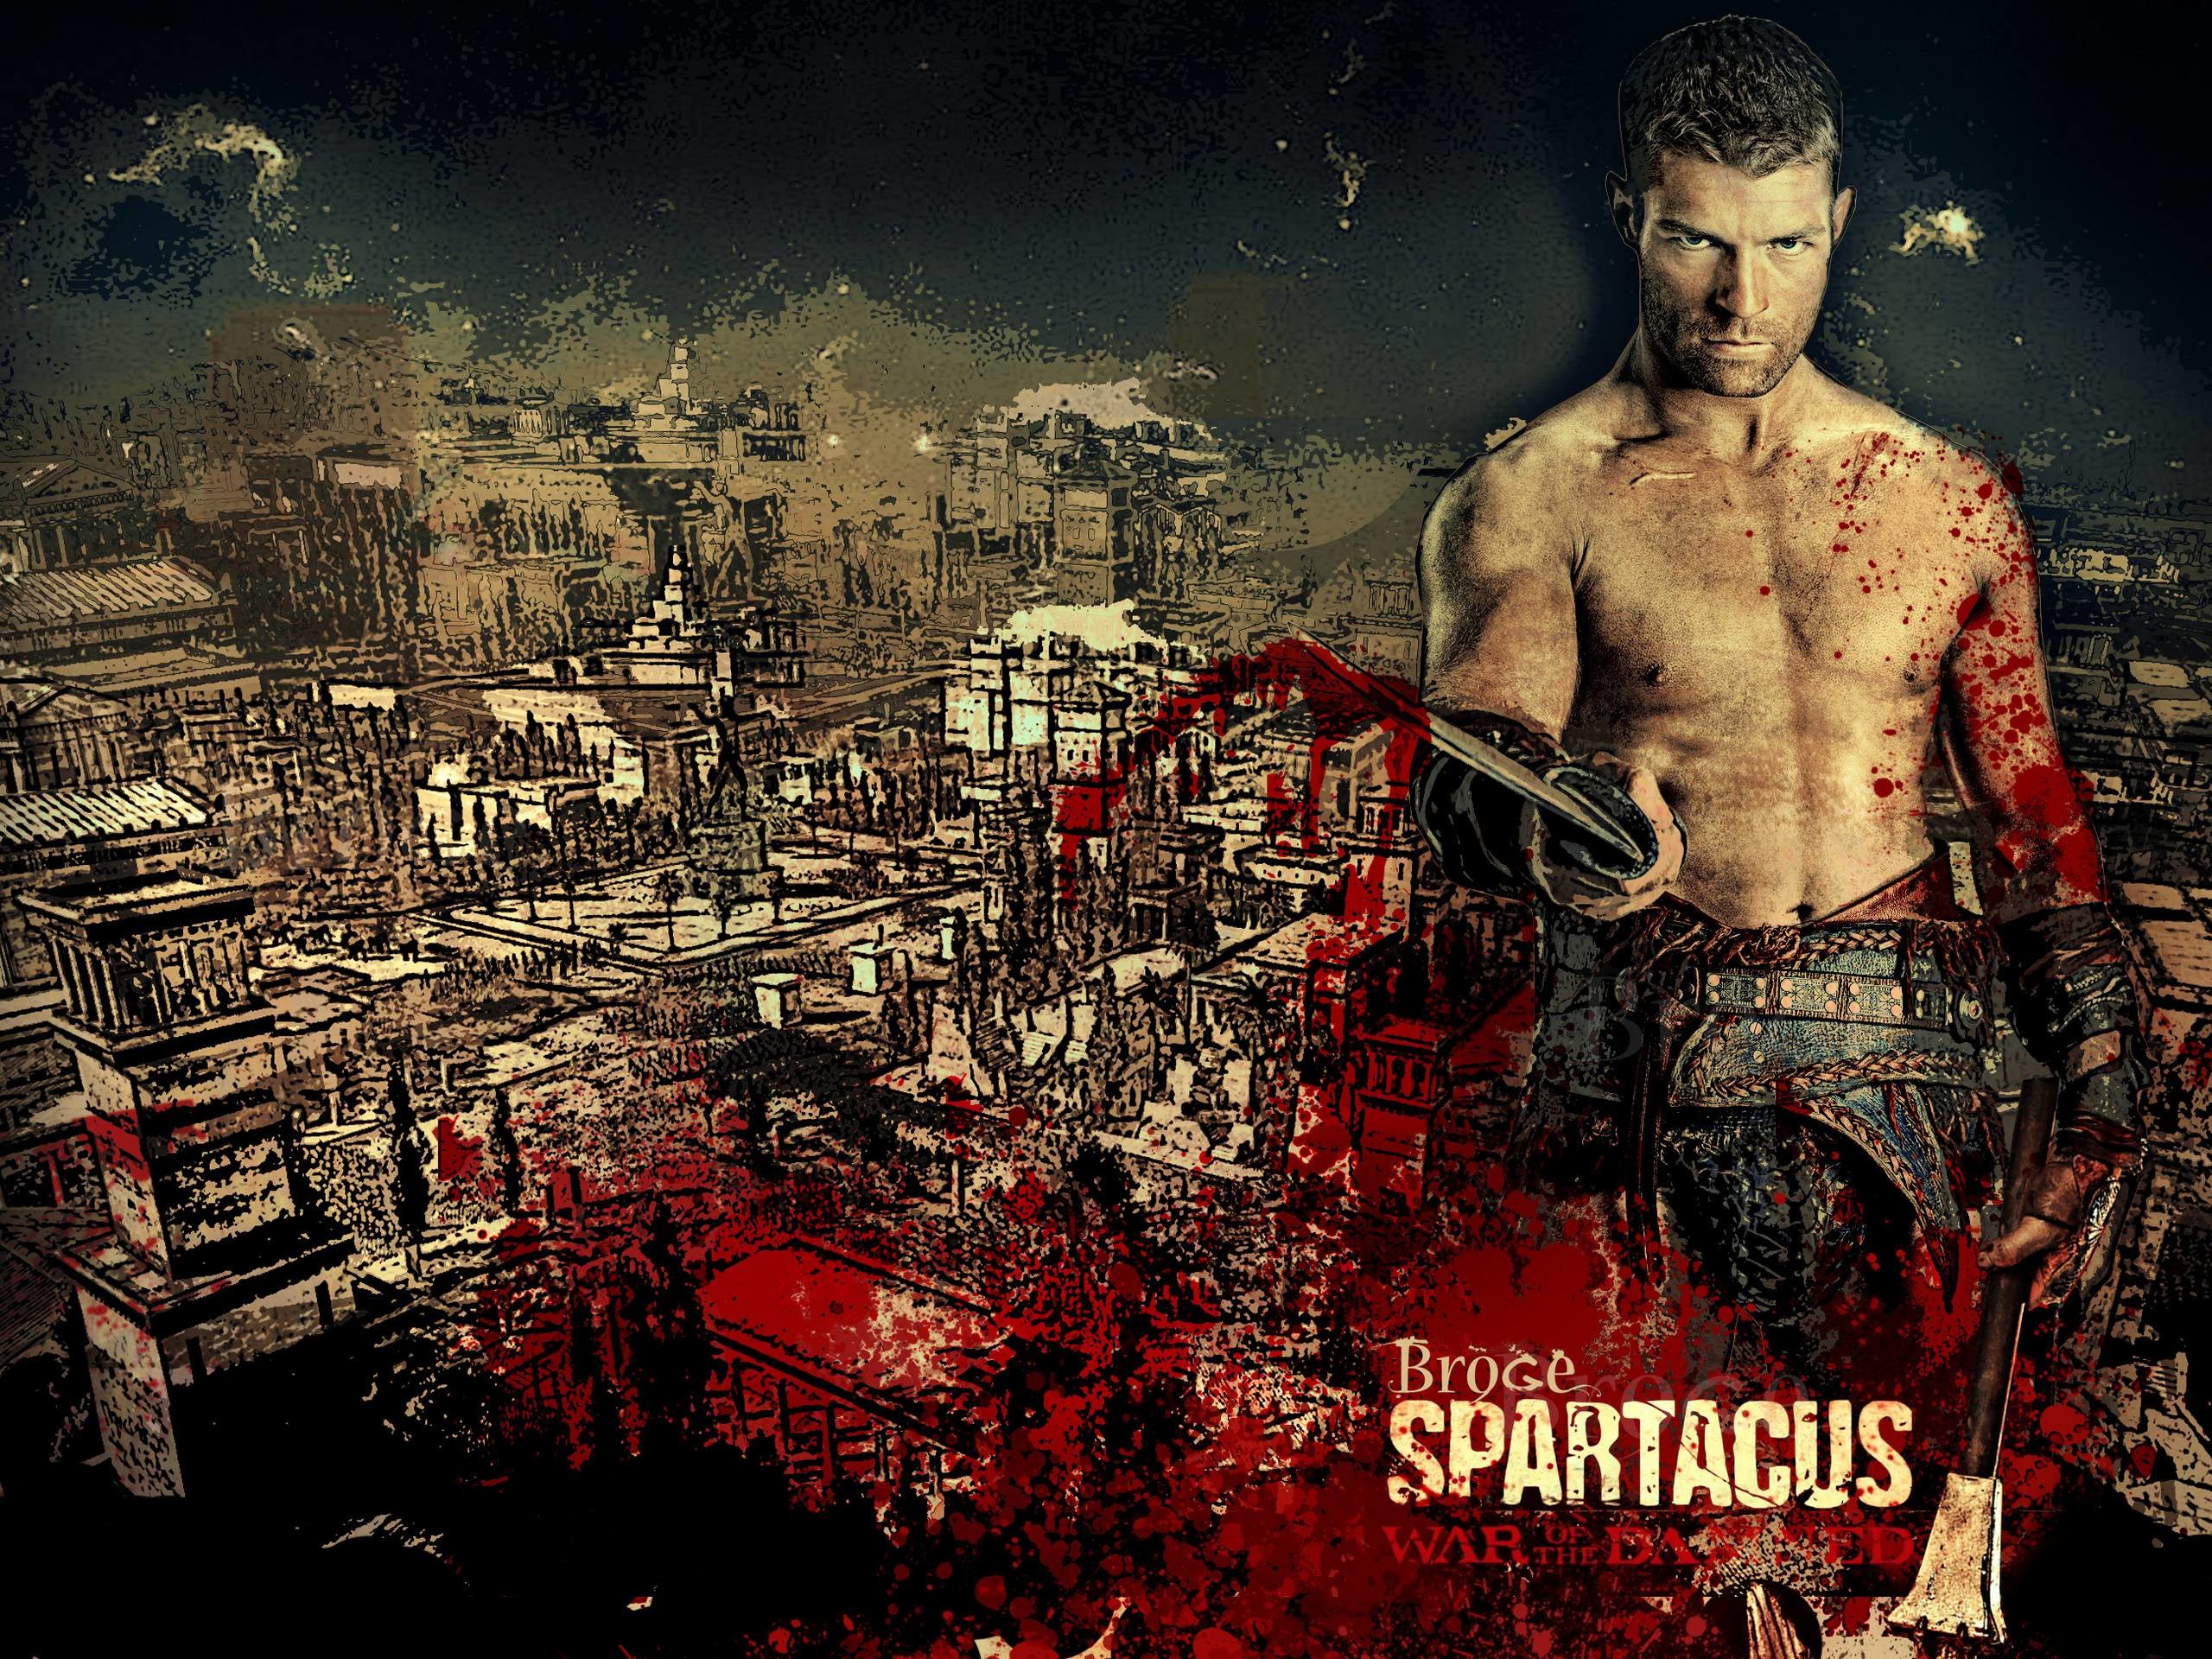 2560x1920 Spartacus HD Wallpapers War of the demand